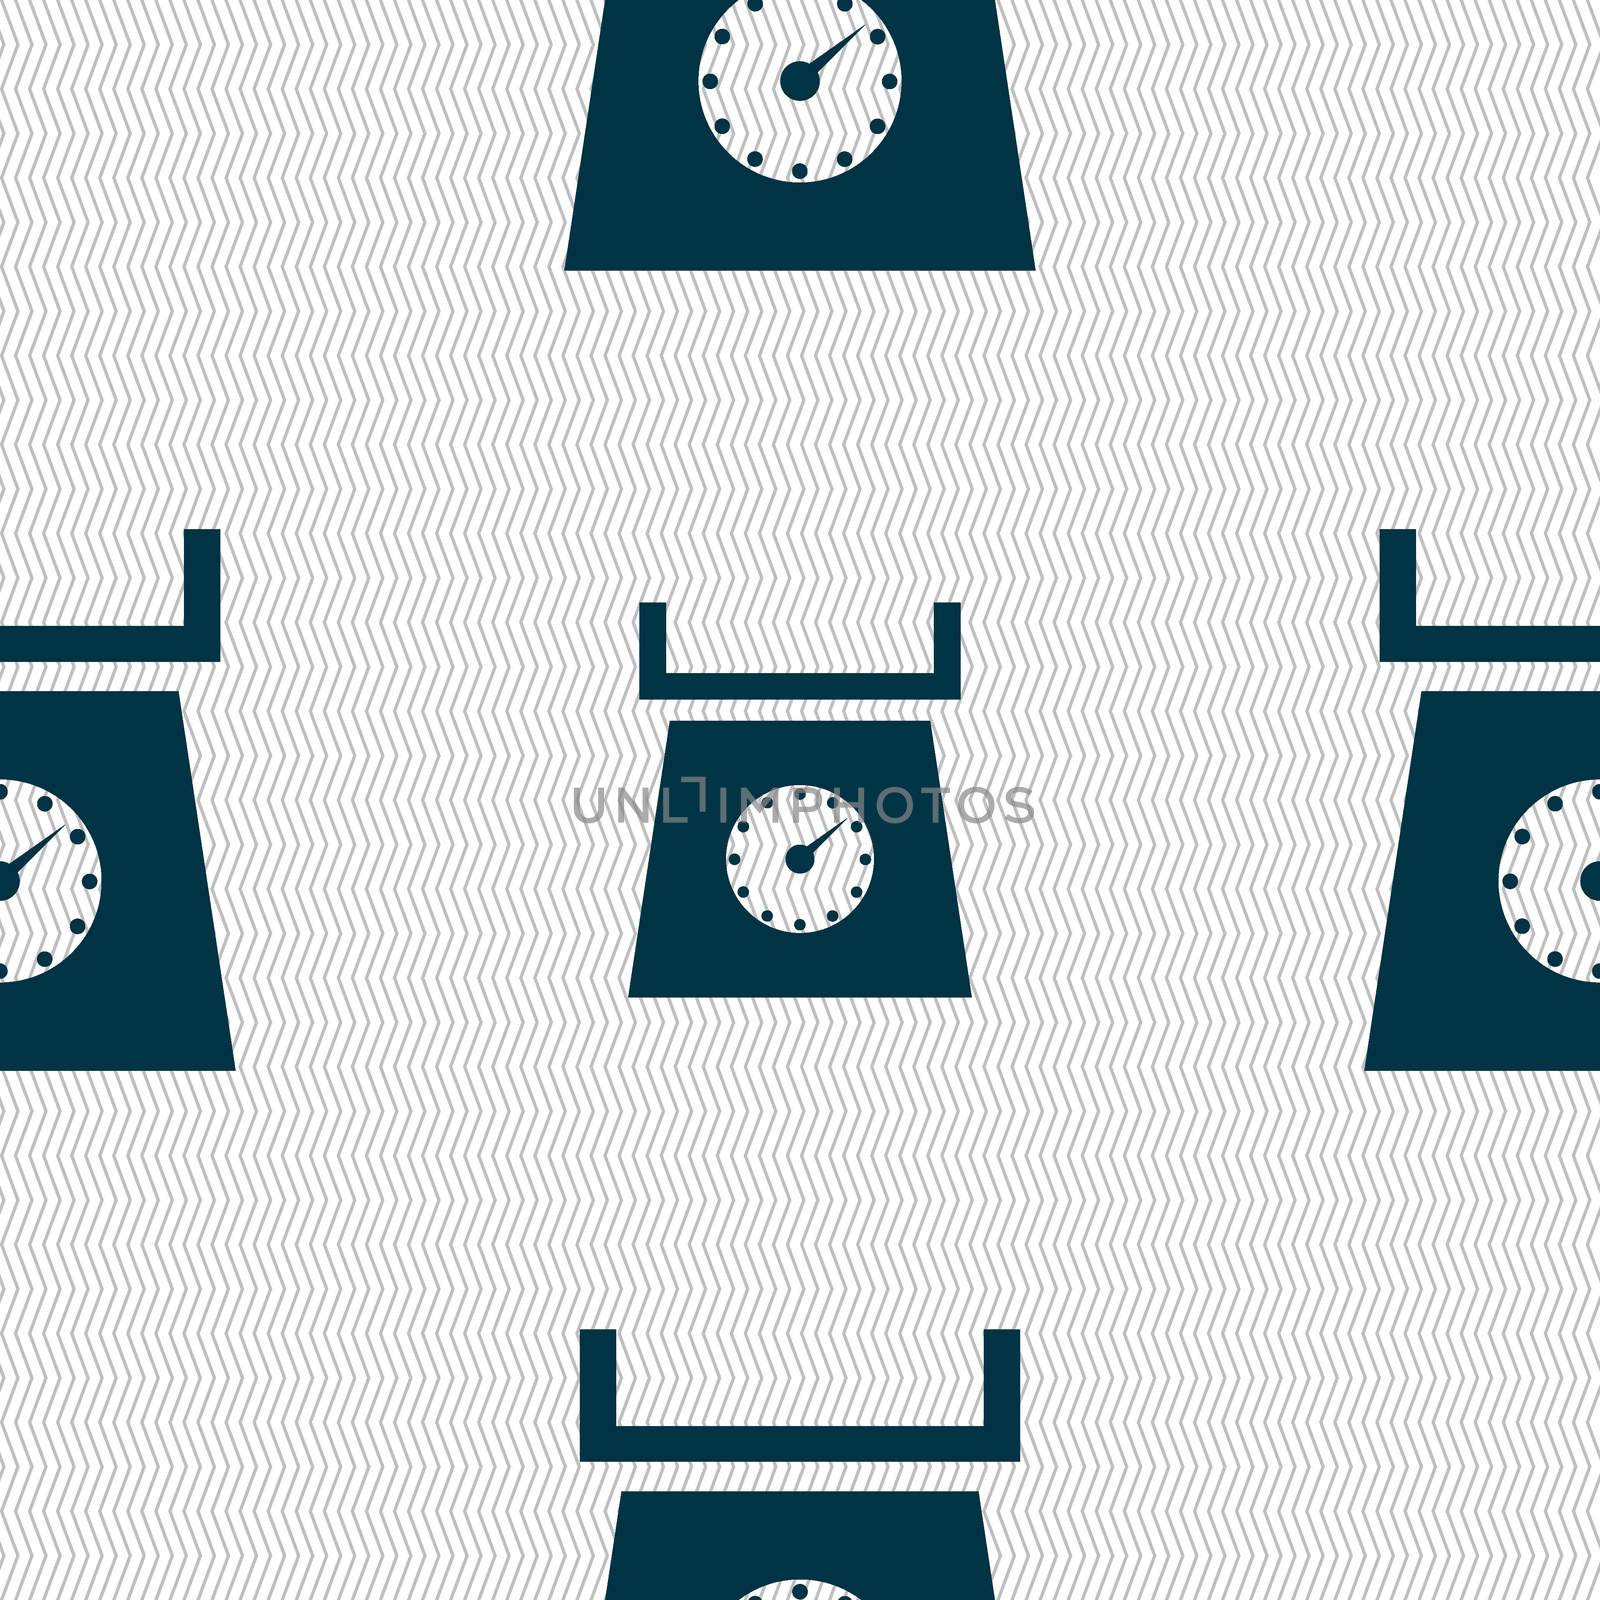 kitchen scales icon sign. Seamless abstract background with geometric shapes. illustration